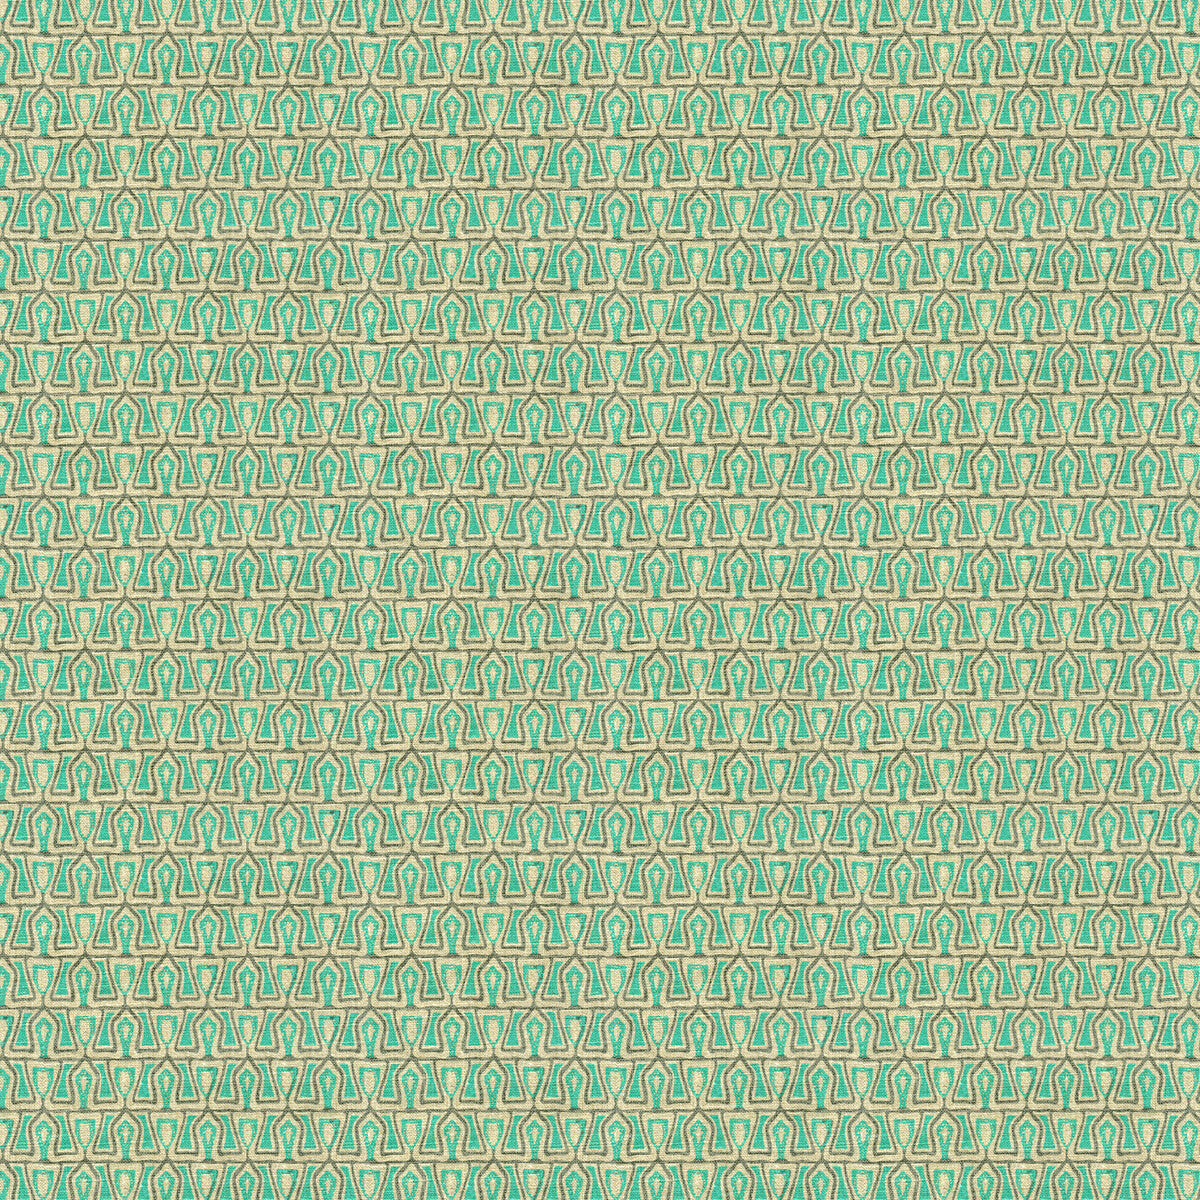 Passage fabric in aqua color - pattern GWF-3505.13.0 - by Lee Jofa Modern in the Allegra Hicks Garden collection